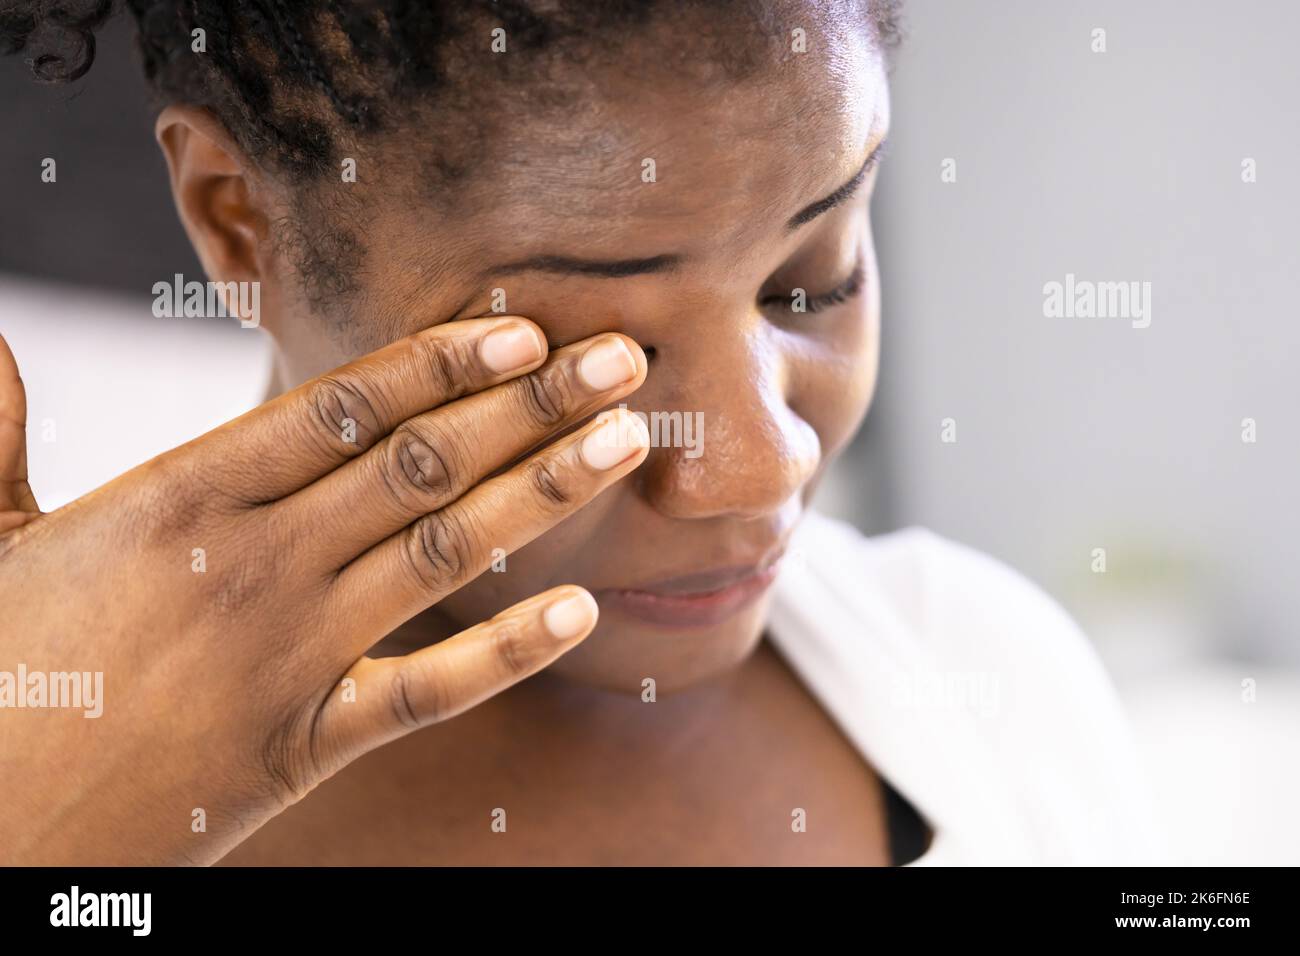 Eye Pain And Inflammation. Woman With Retina Fatigue And Spasm Stock Photo